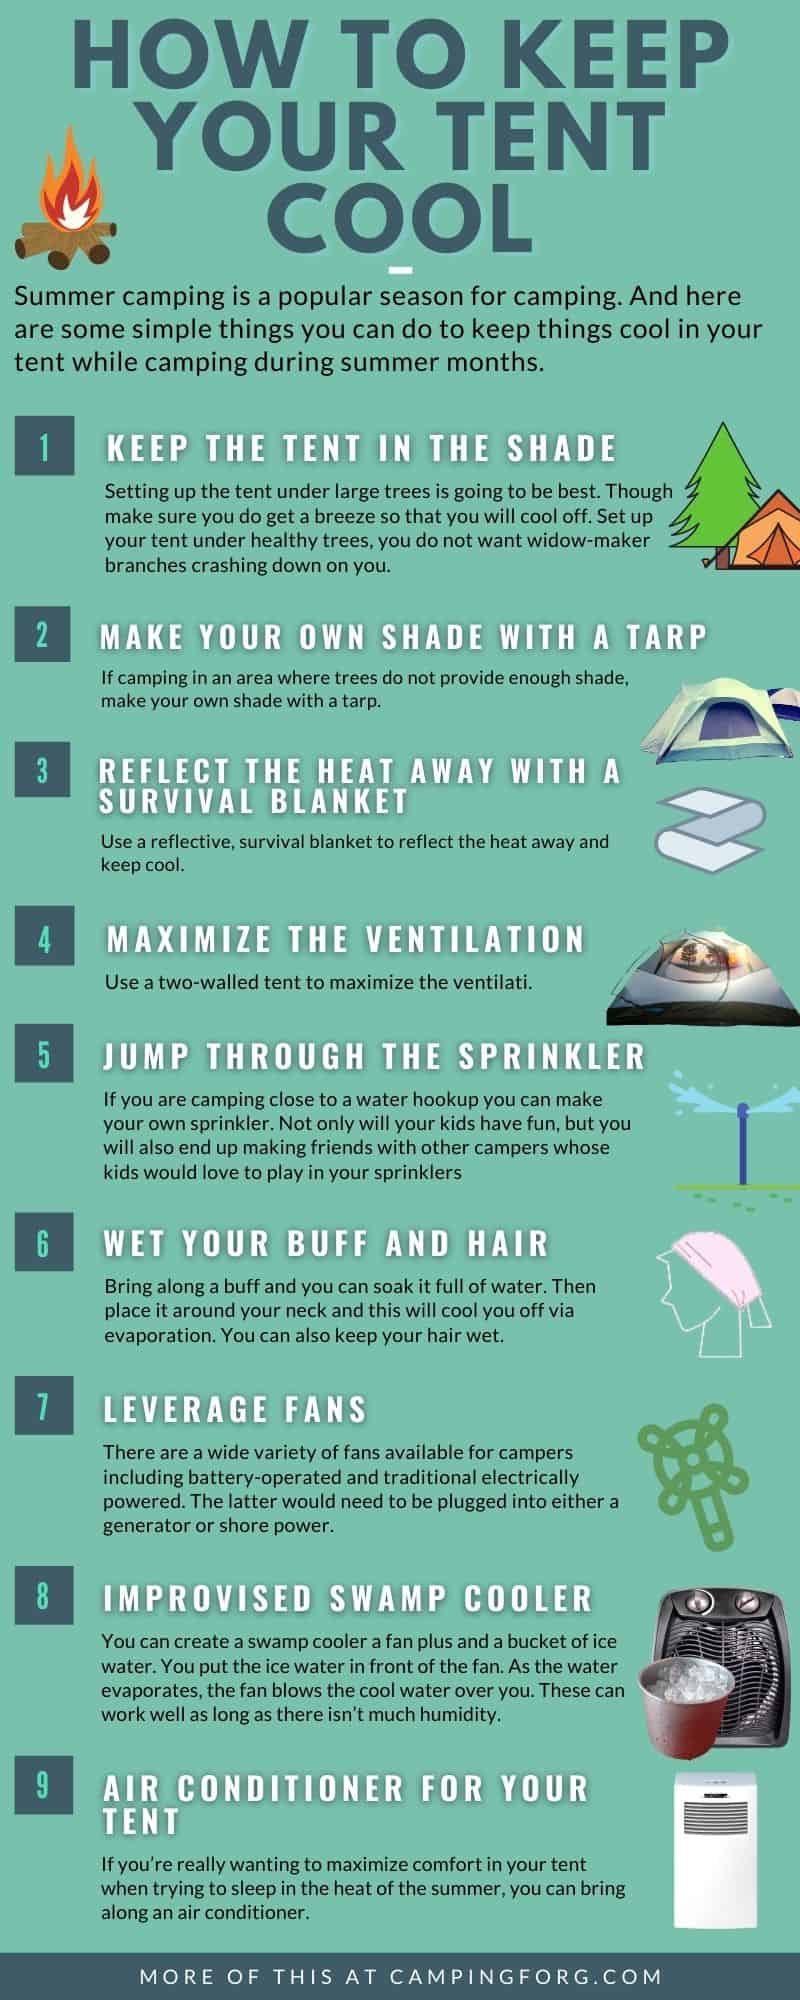 Infographic on how to keep your tent cool